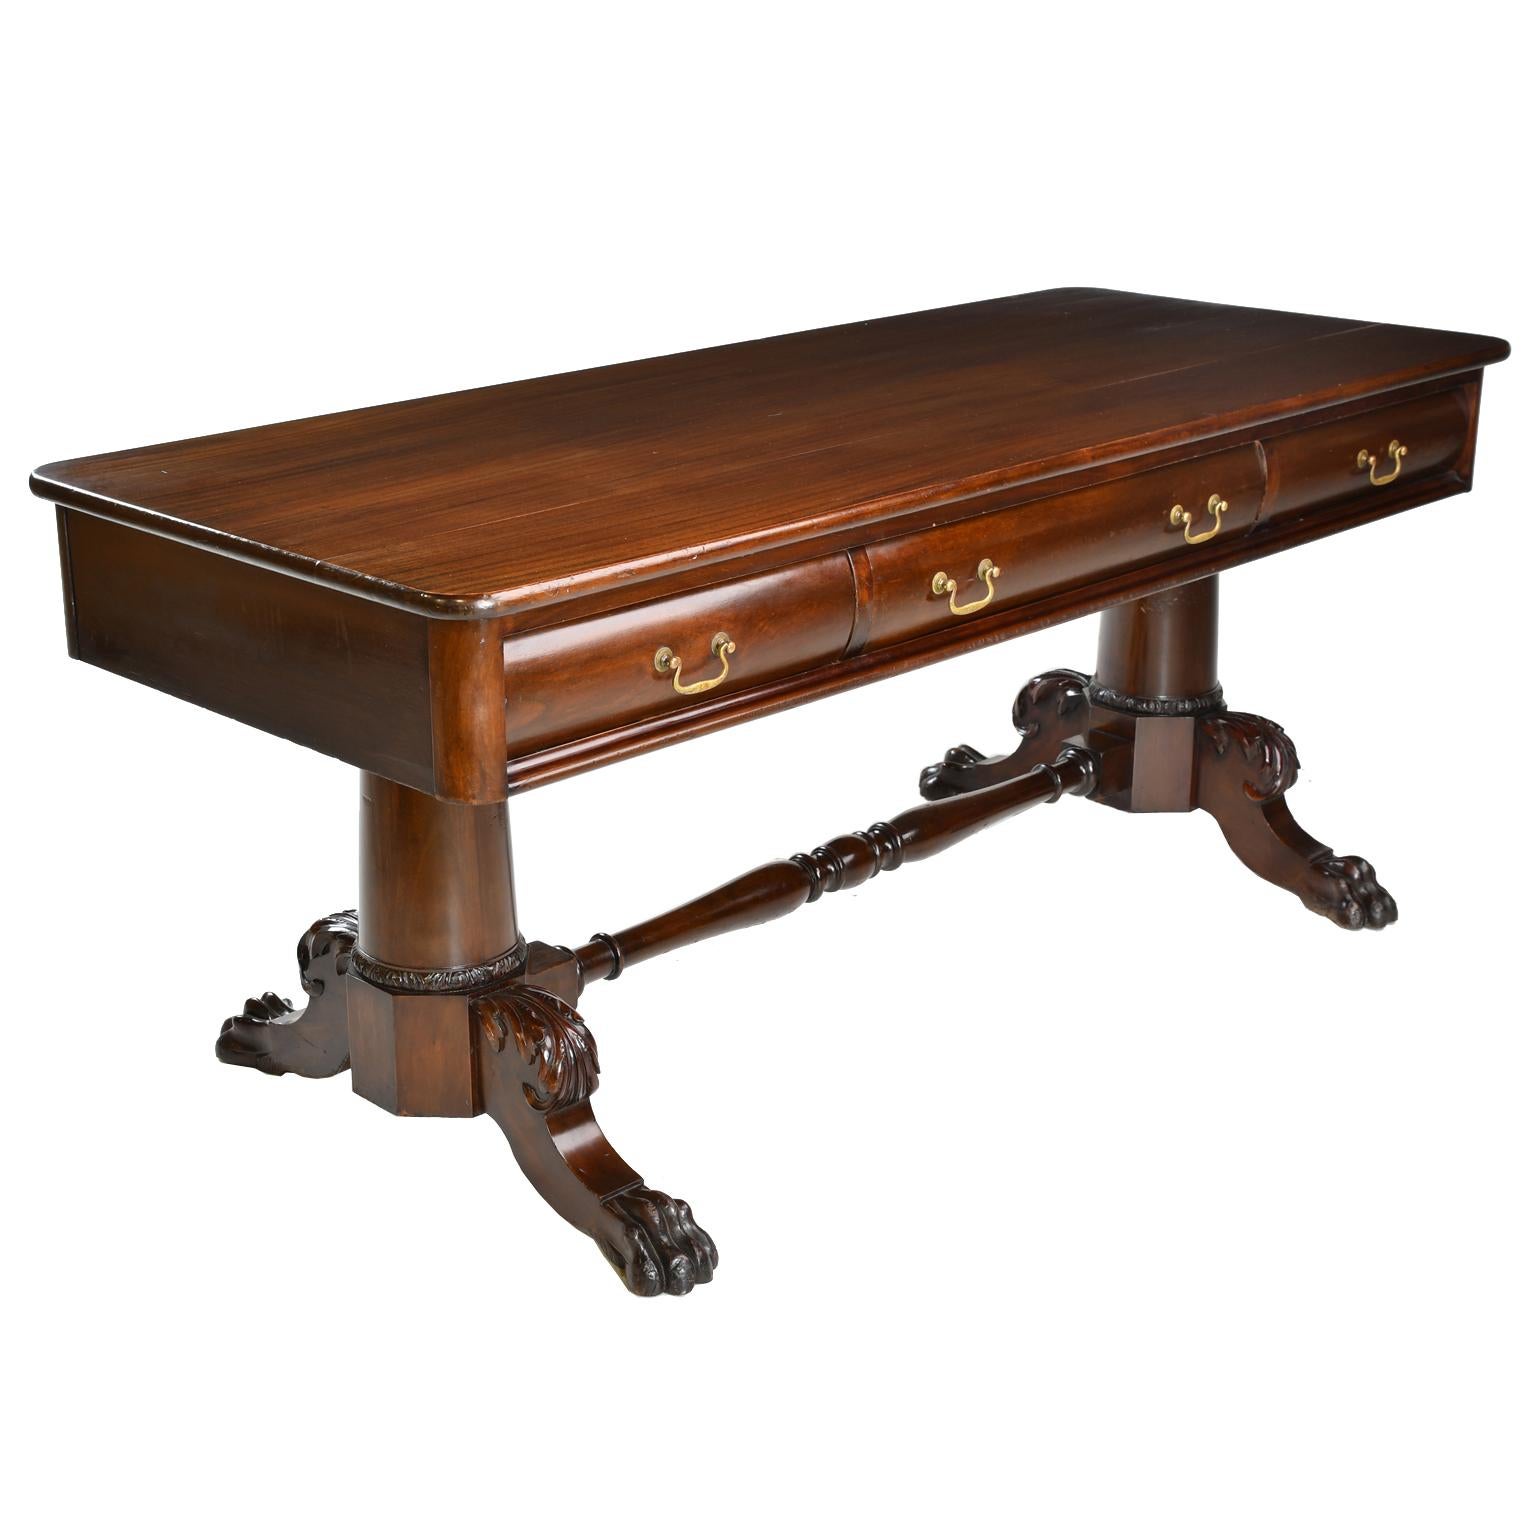 American Classical Antique Classical American Philadelphia Desk in Mahogany with Double Pedestal For Sale